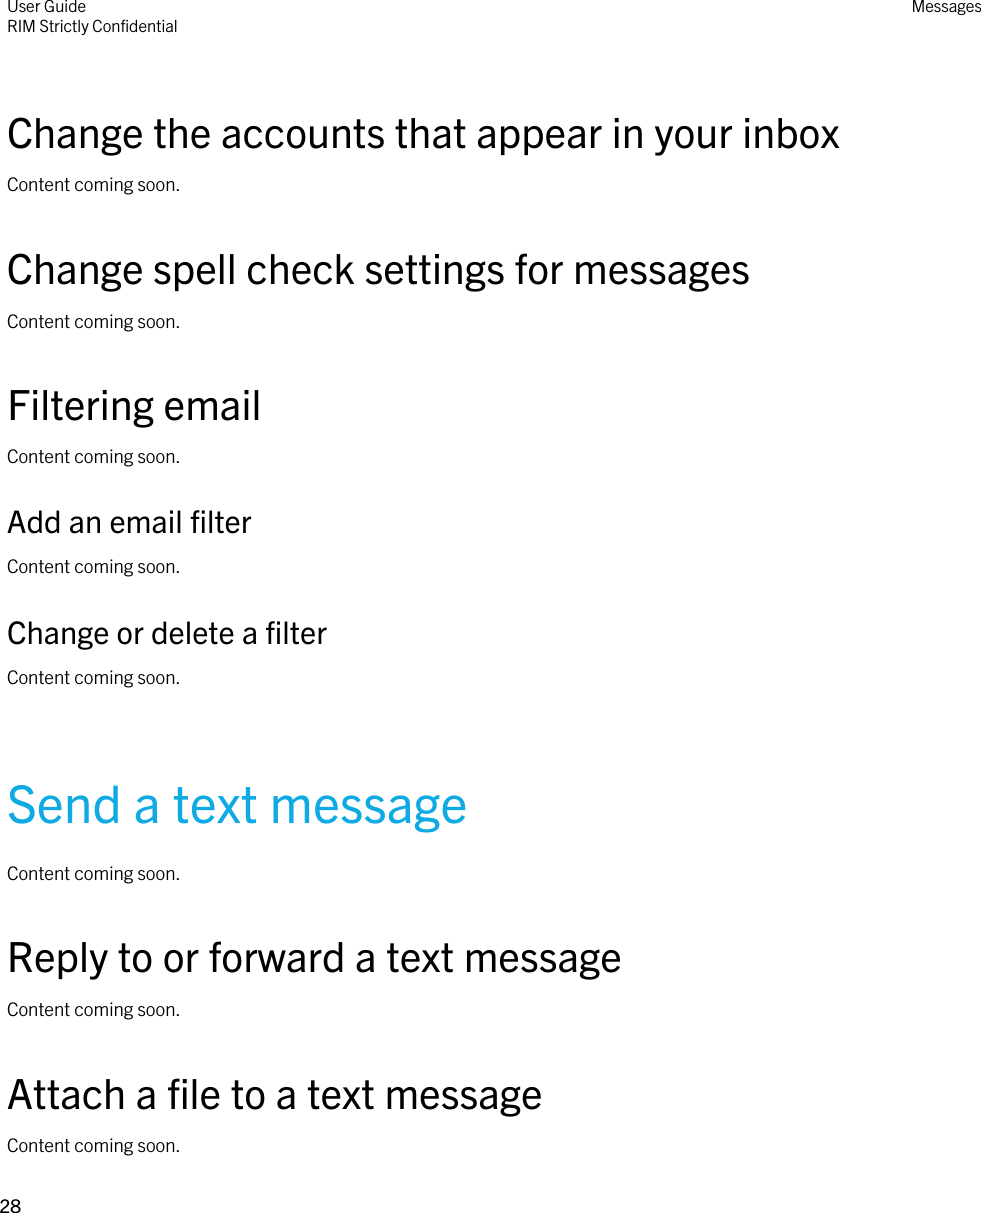 Change the accounts that appear in your inboxContent coming soon.Change spell check settings for messagesContent coming soon.Filtering emailContent coming soon.Add an email filterContent coming soon.Change or delete a filterContent coming soon.Send a text messageContent coming soon.Reply to or forward a text messageContent coming soon.Attach a file to a text messageContent coming soon.User GuideRIM Strictly Confidential Messages28 